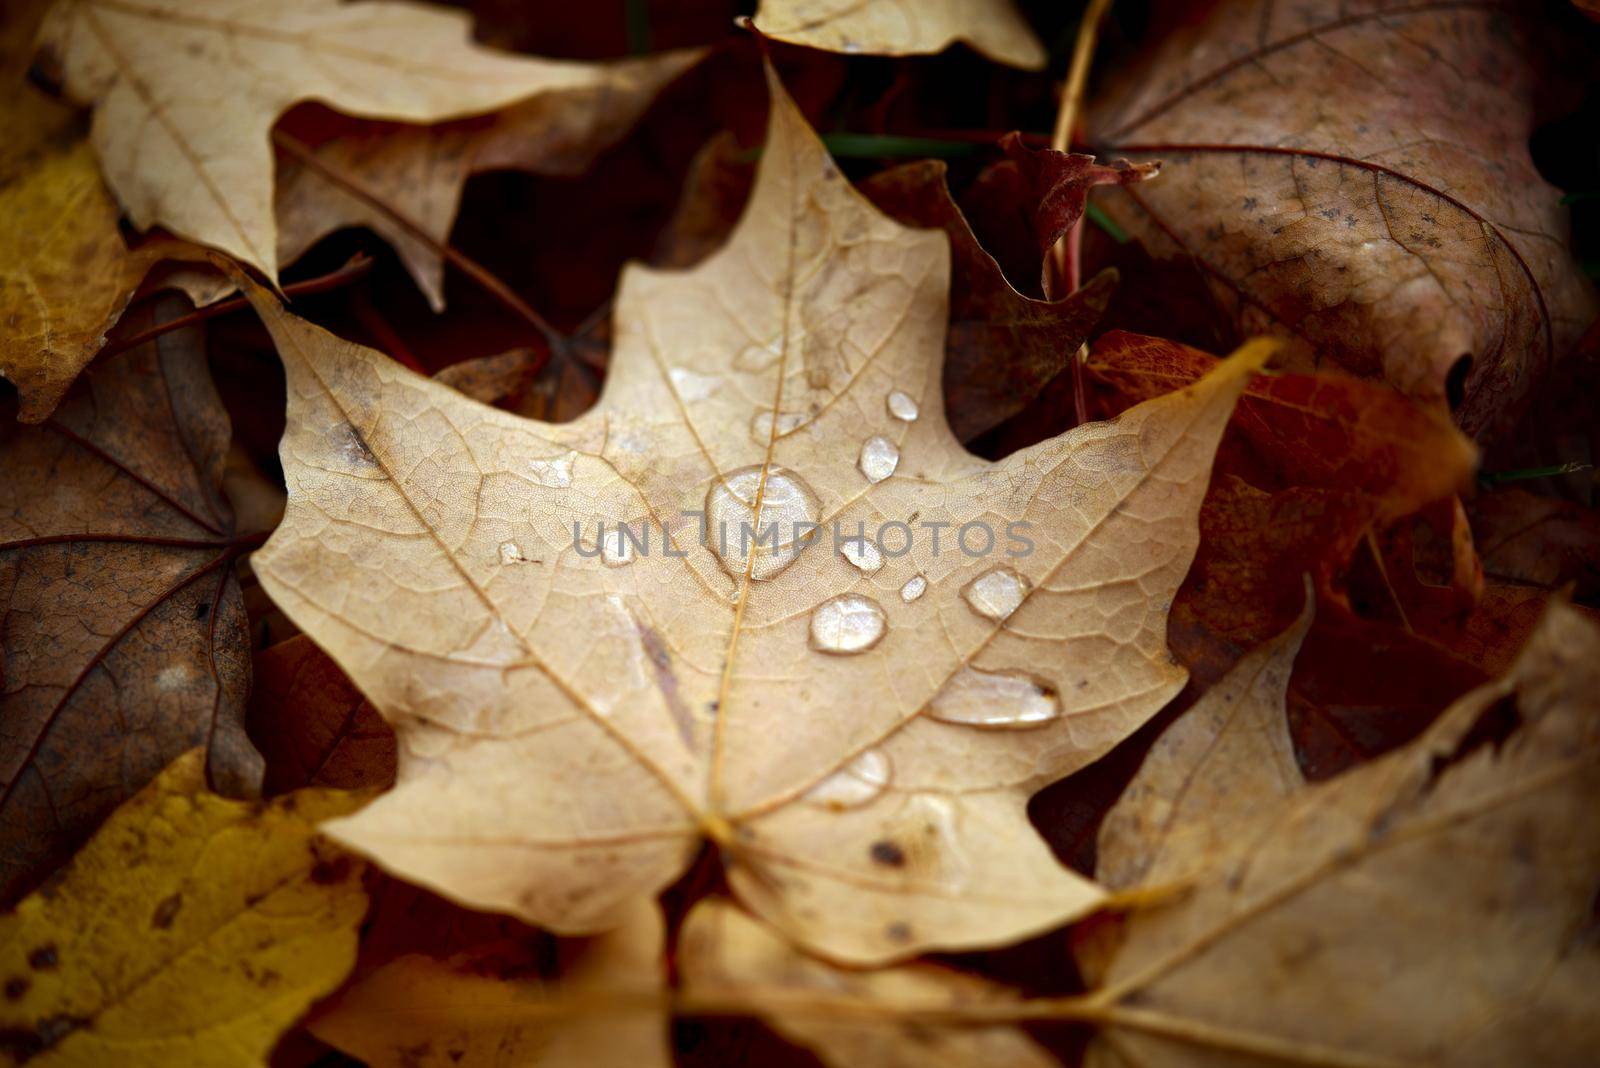 Signs of the Fall. Leaf Covered by Water Drops Laying on the Ground Between Other Leaves. Autumn Photo Collection.